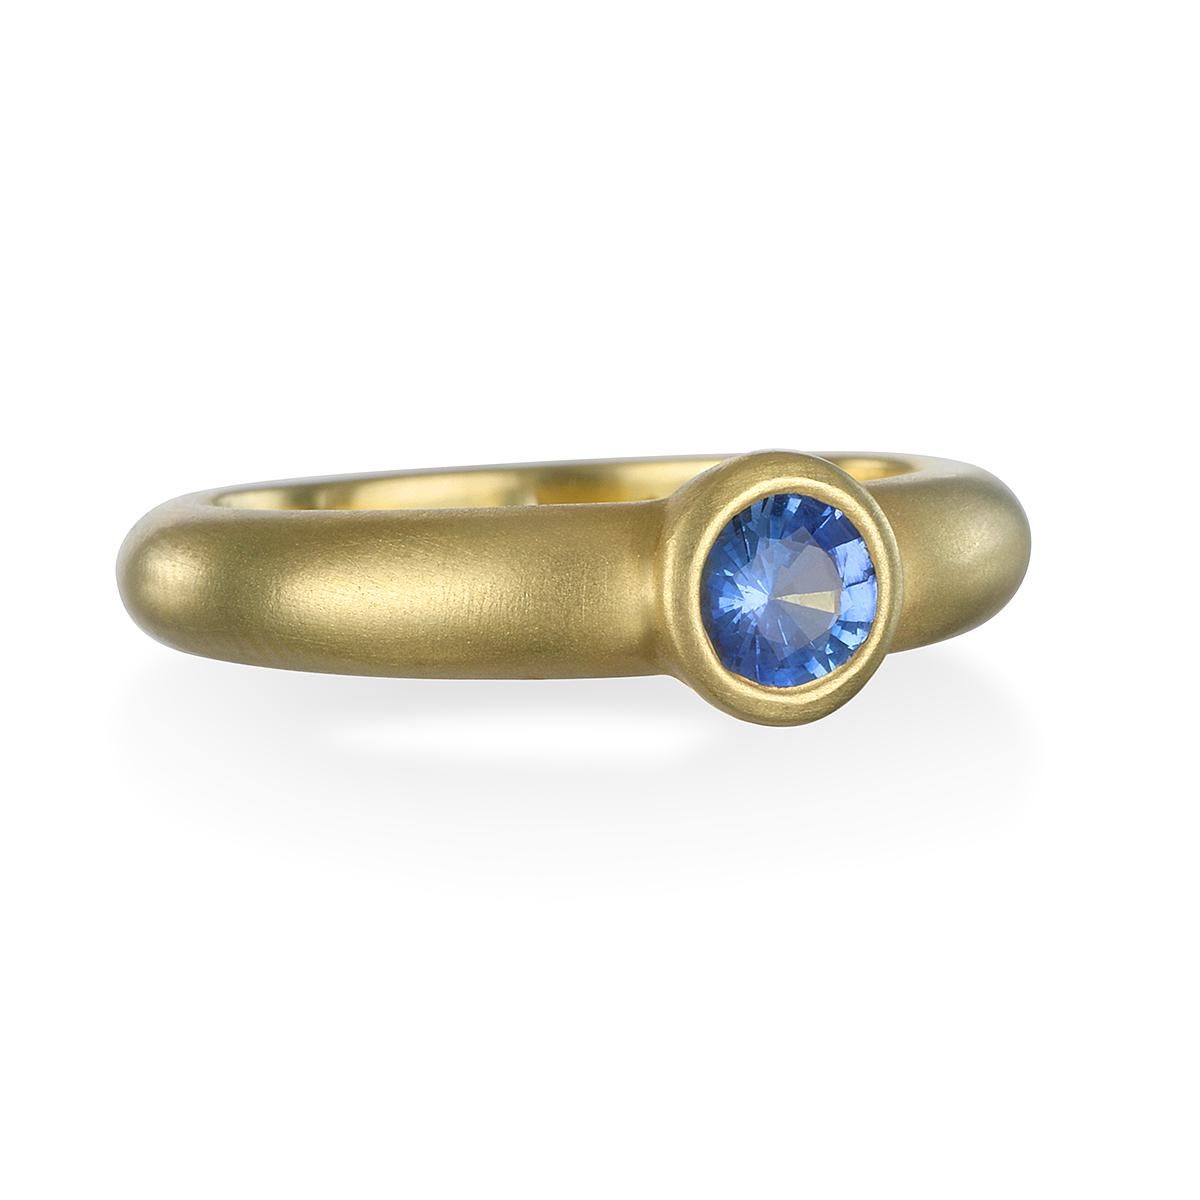 Beauty in simplicity exemplified in Faye Kim's 18k gold blue sapphire bezel ring.
Bright blue round sapphire is bezel set and matte finished for a contemporary style; wear alone or stack with other rings to create your own unique style.

Sapphire: 